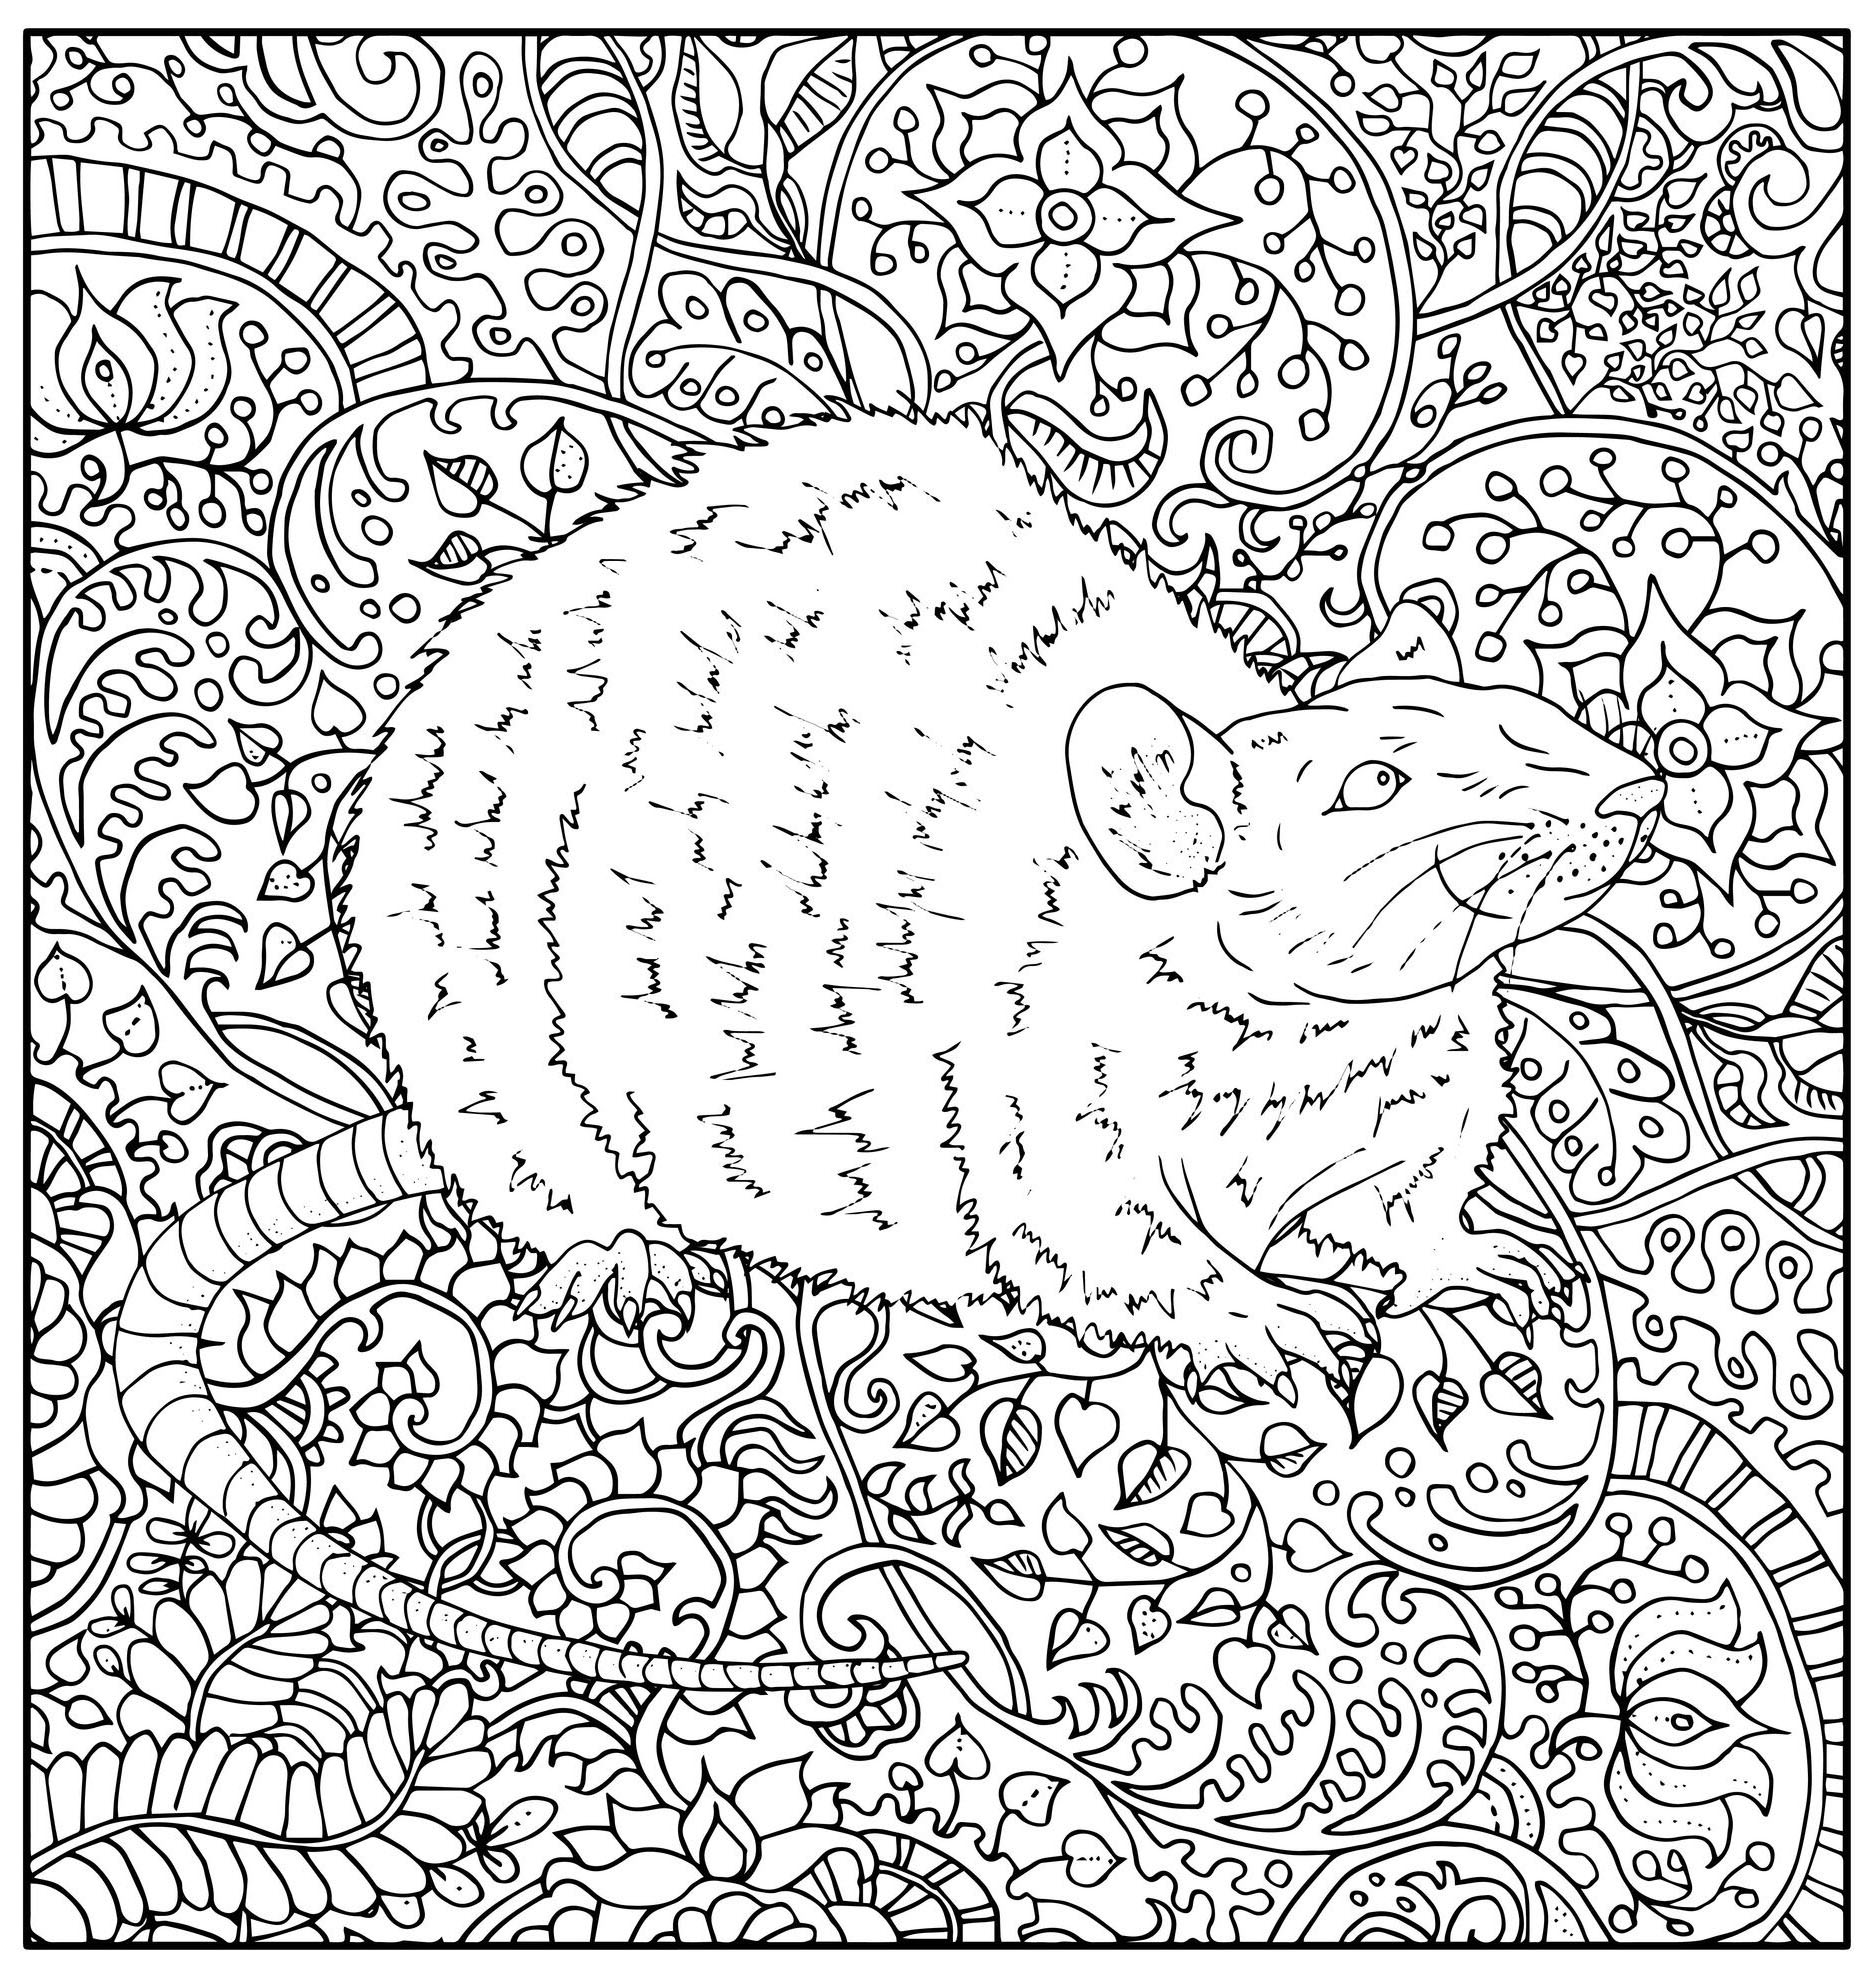 Rat on floral patterns   Mouses Adult Coloring Pages